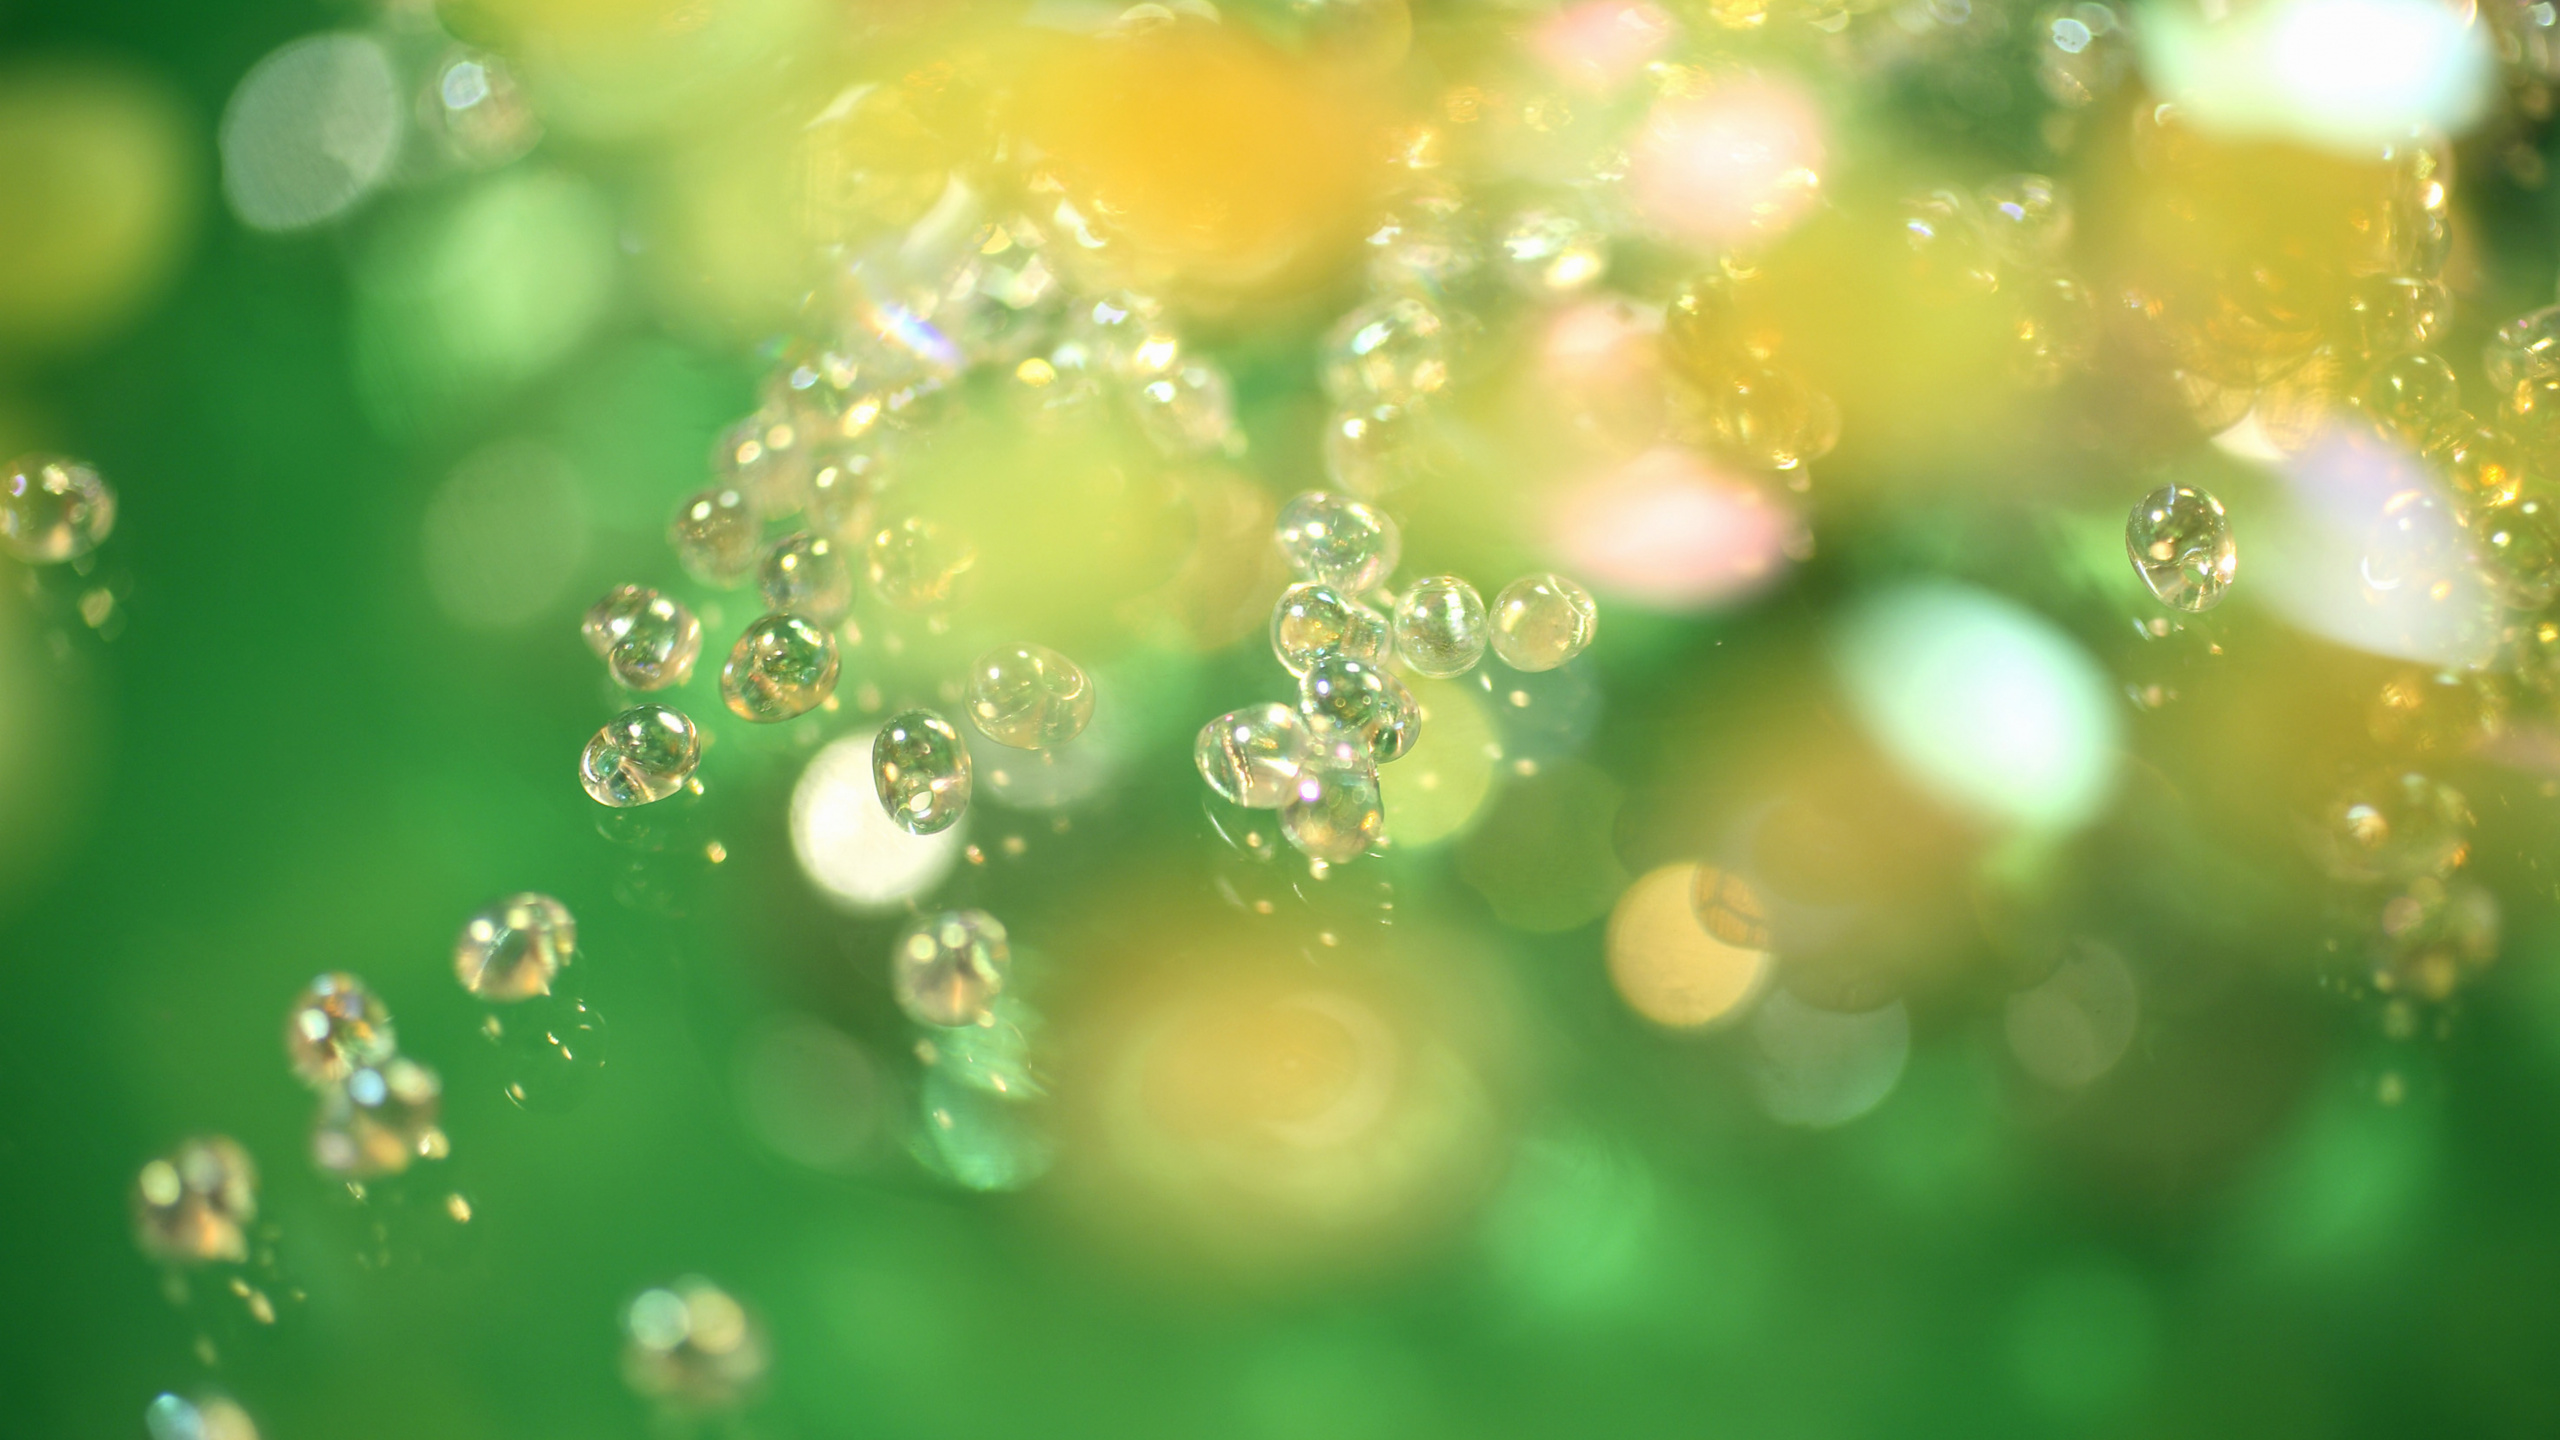 Water Droplets on Green Surface. Wallpaper in 2560x1440 Resolution